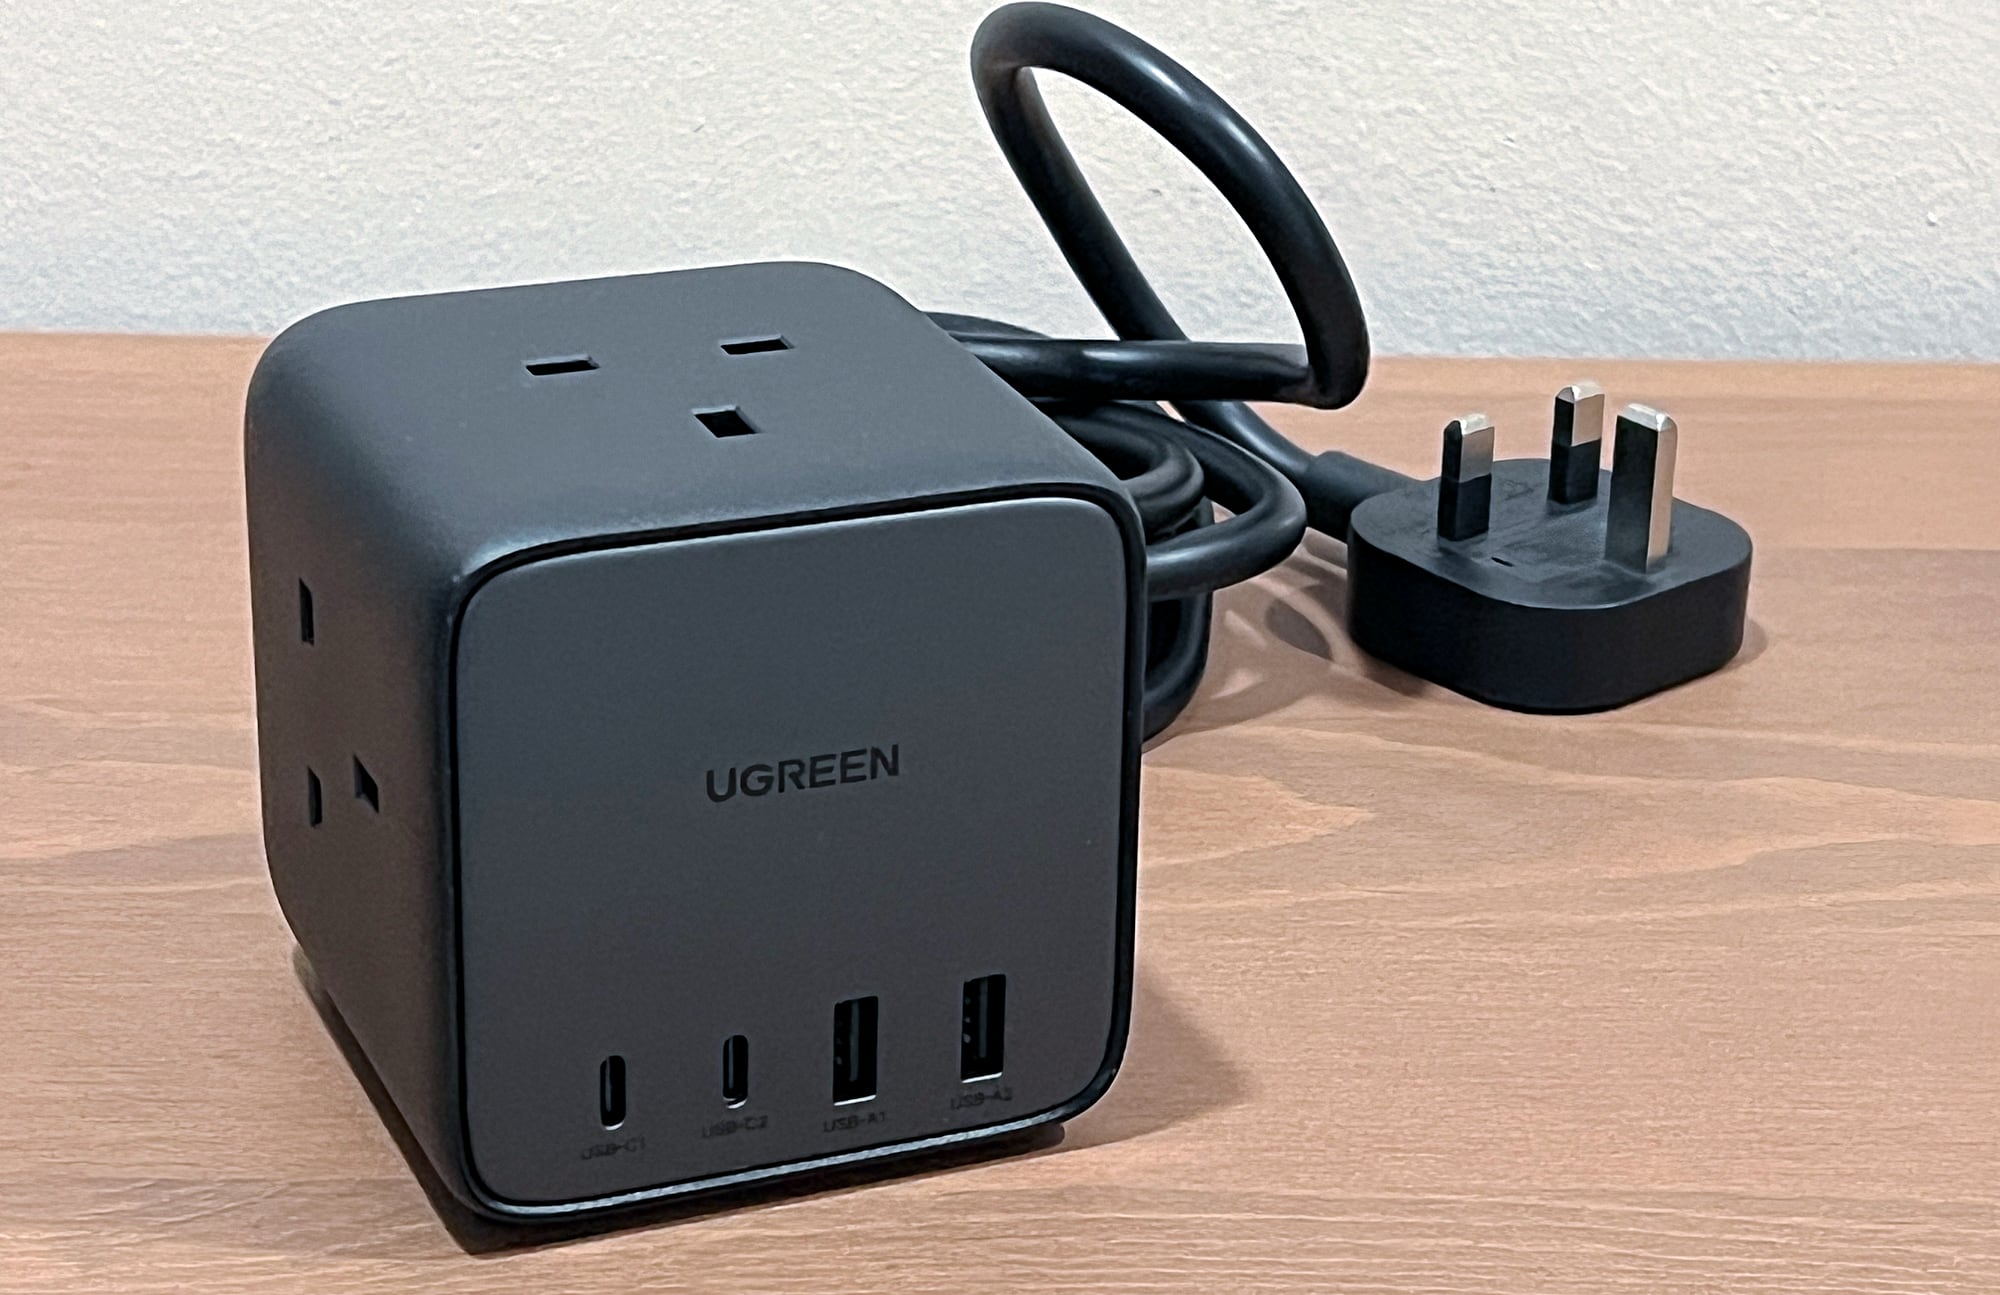 Ugreen 65W DigiNest Cube Review: Compact convenient charging station